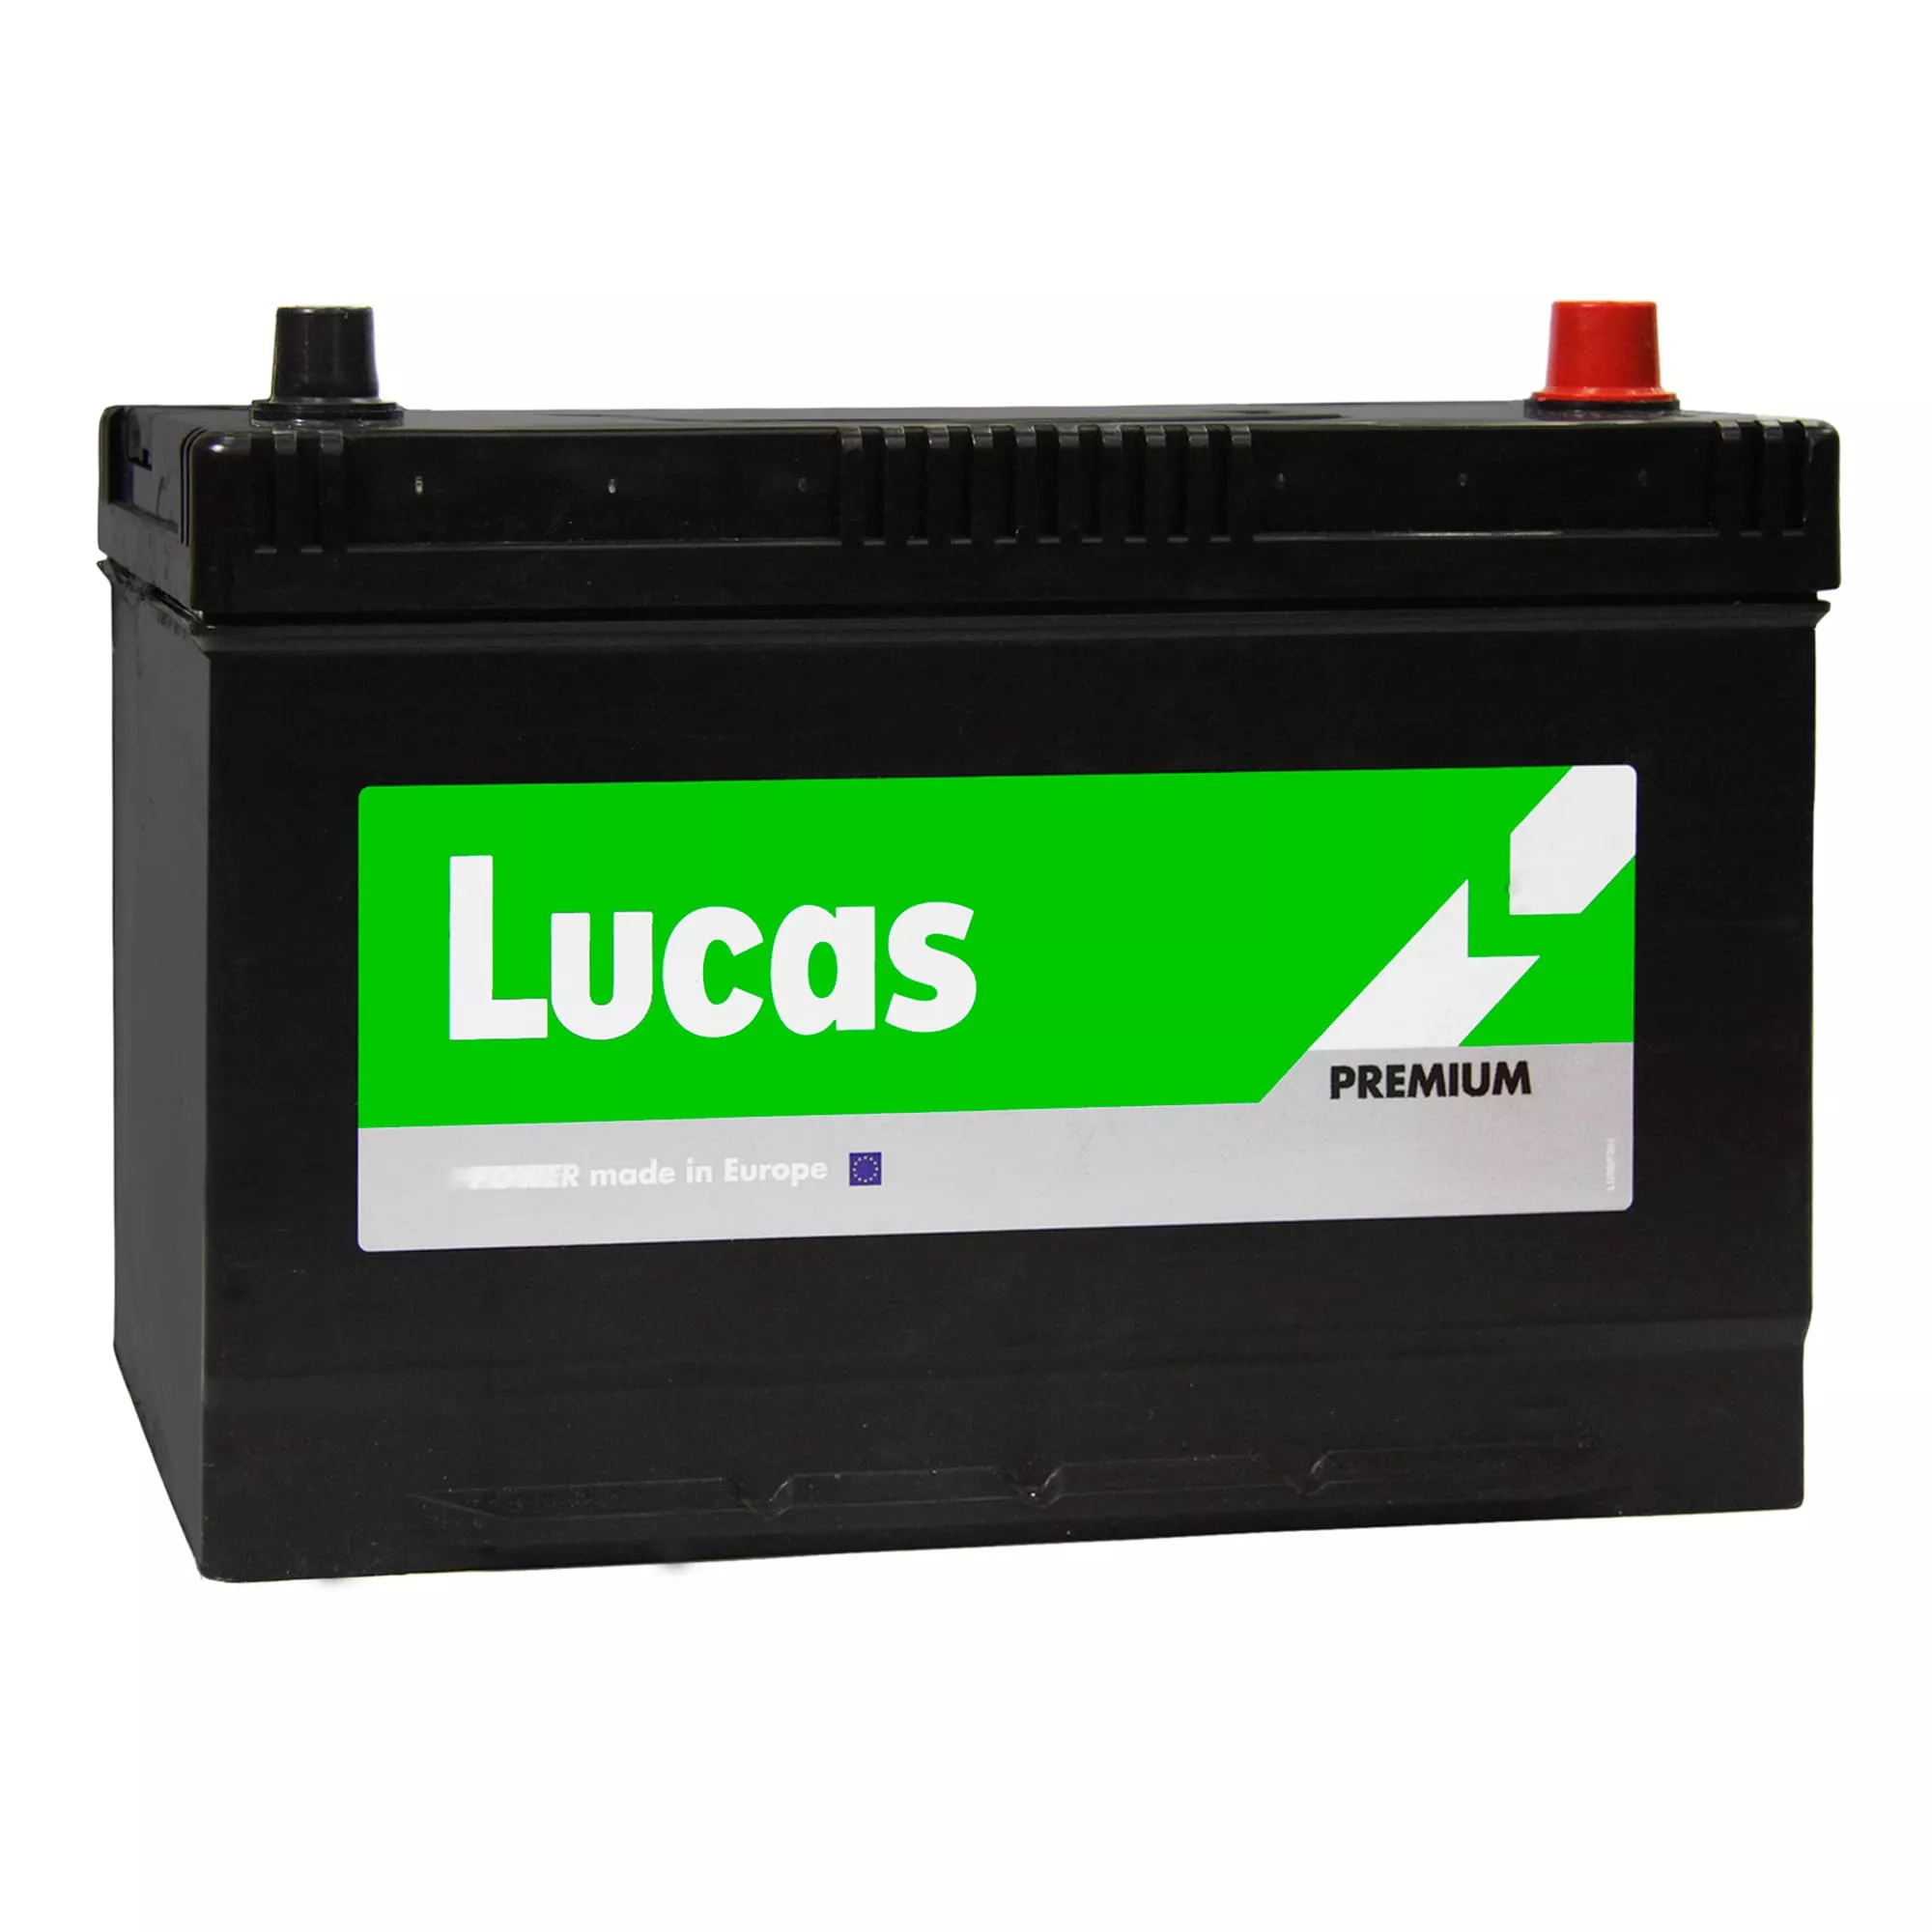 Аккумулятор Lucas (Batteries manufactured by Exide in Spain) 6CT-95 АзЕ Asia (LBPB954)